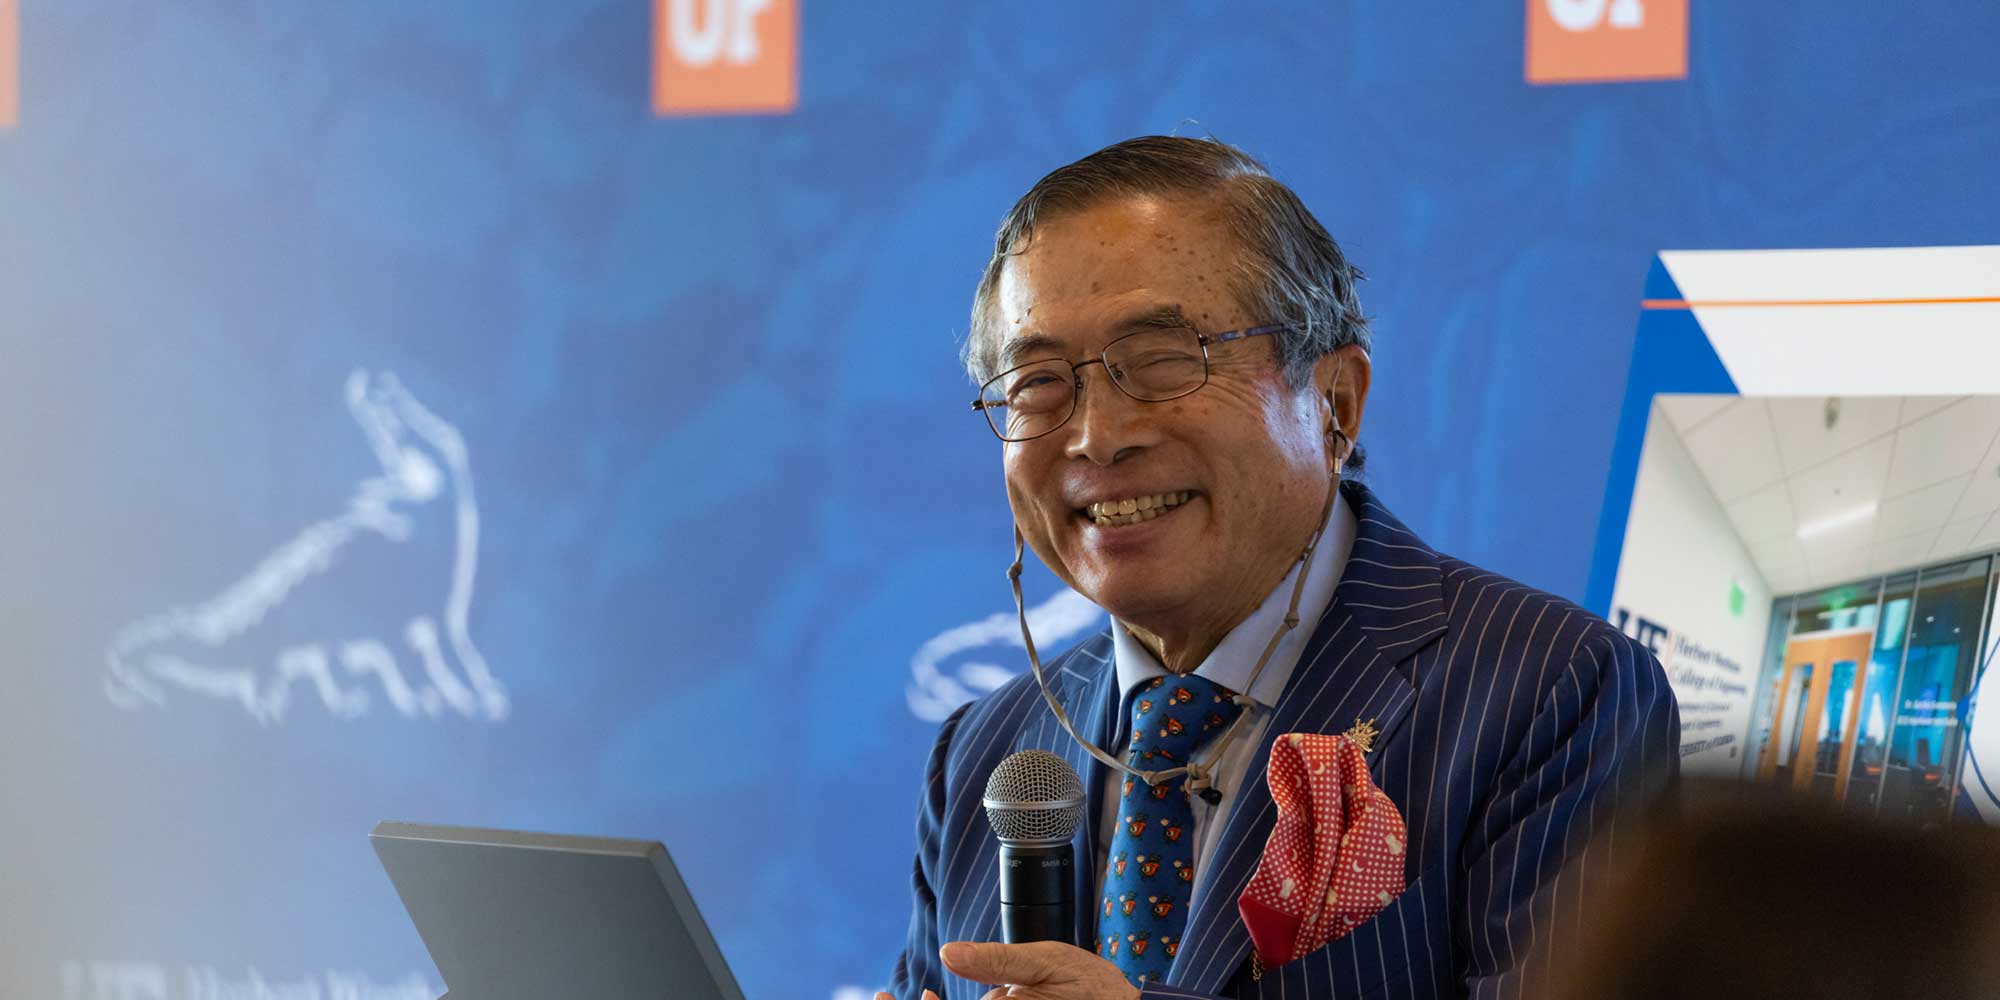 Telecommunications visionary Semmoto gives UF Engineering its first named chair